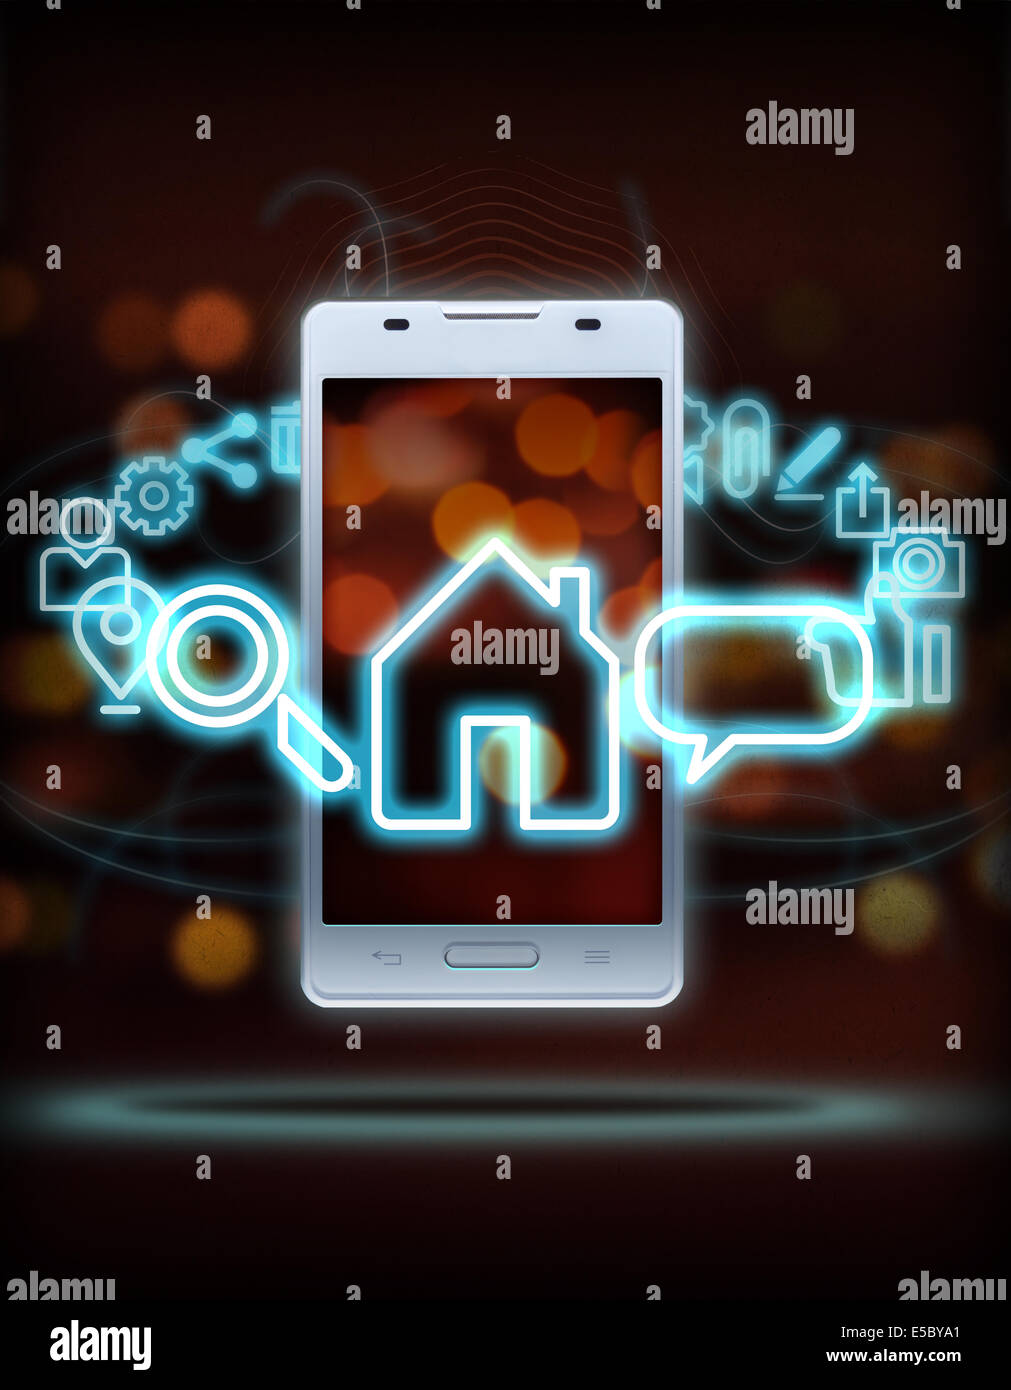 Illustration of various mobile applications rotating around smart phone over colored background Stock Photo